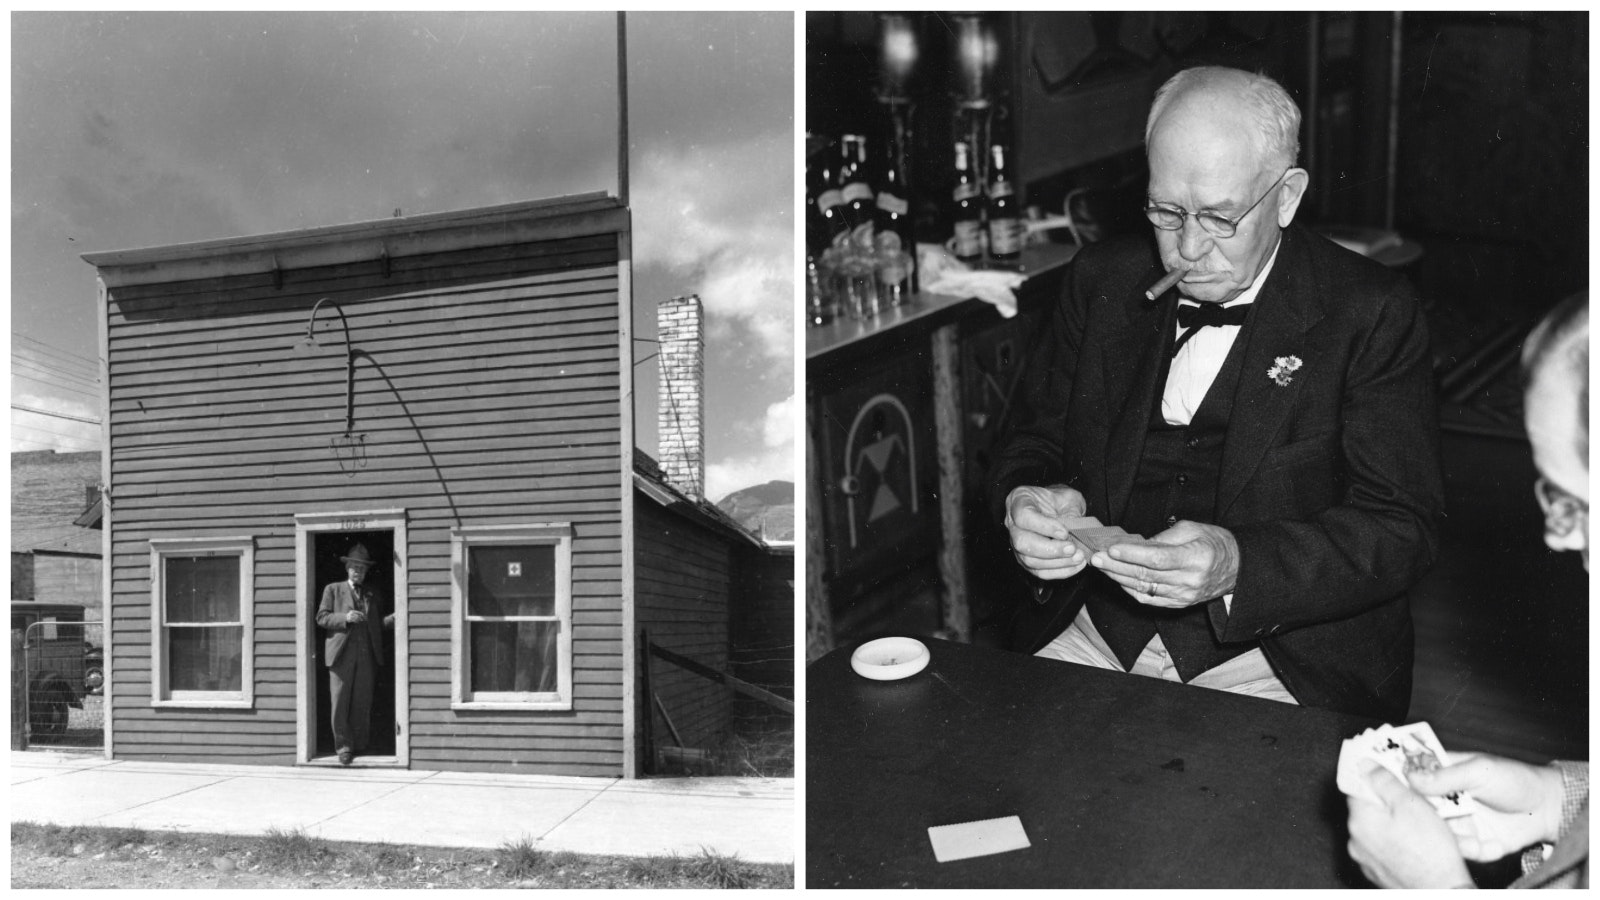 George Beck, one of Cody's founding fathers, directed the building of the Green Front Building, then bought it in 1904 and worked out of it into the 1940s. He's seen at left standing in the doorway and at right playing cards in it (the building housed a famous card game).